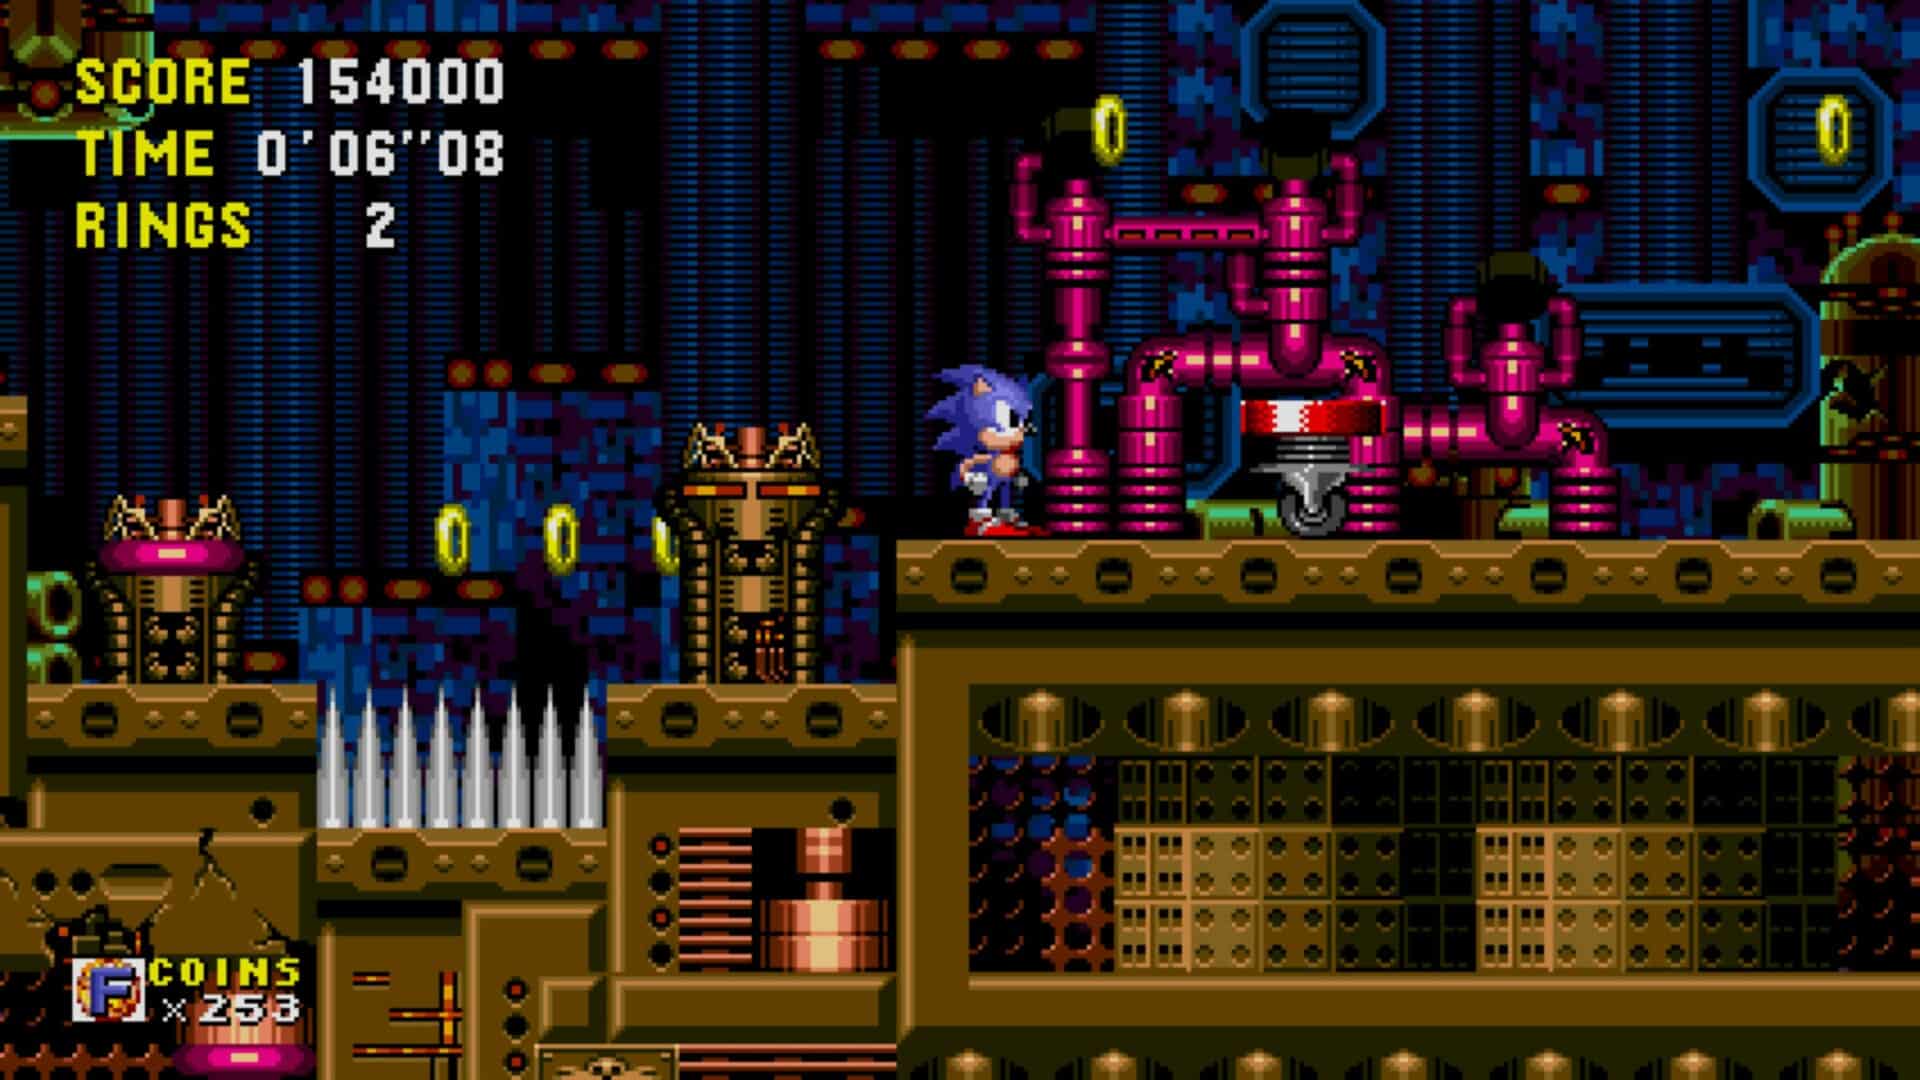 Classic Sonic Games Discounted on PlayStation